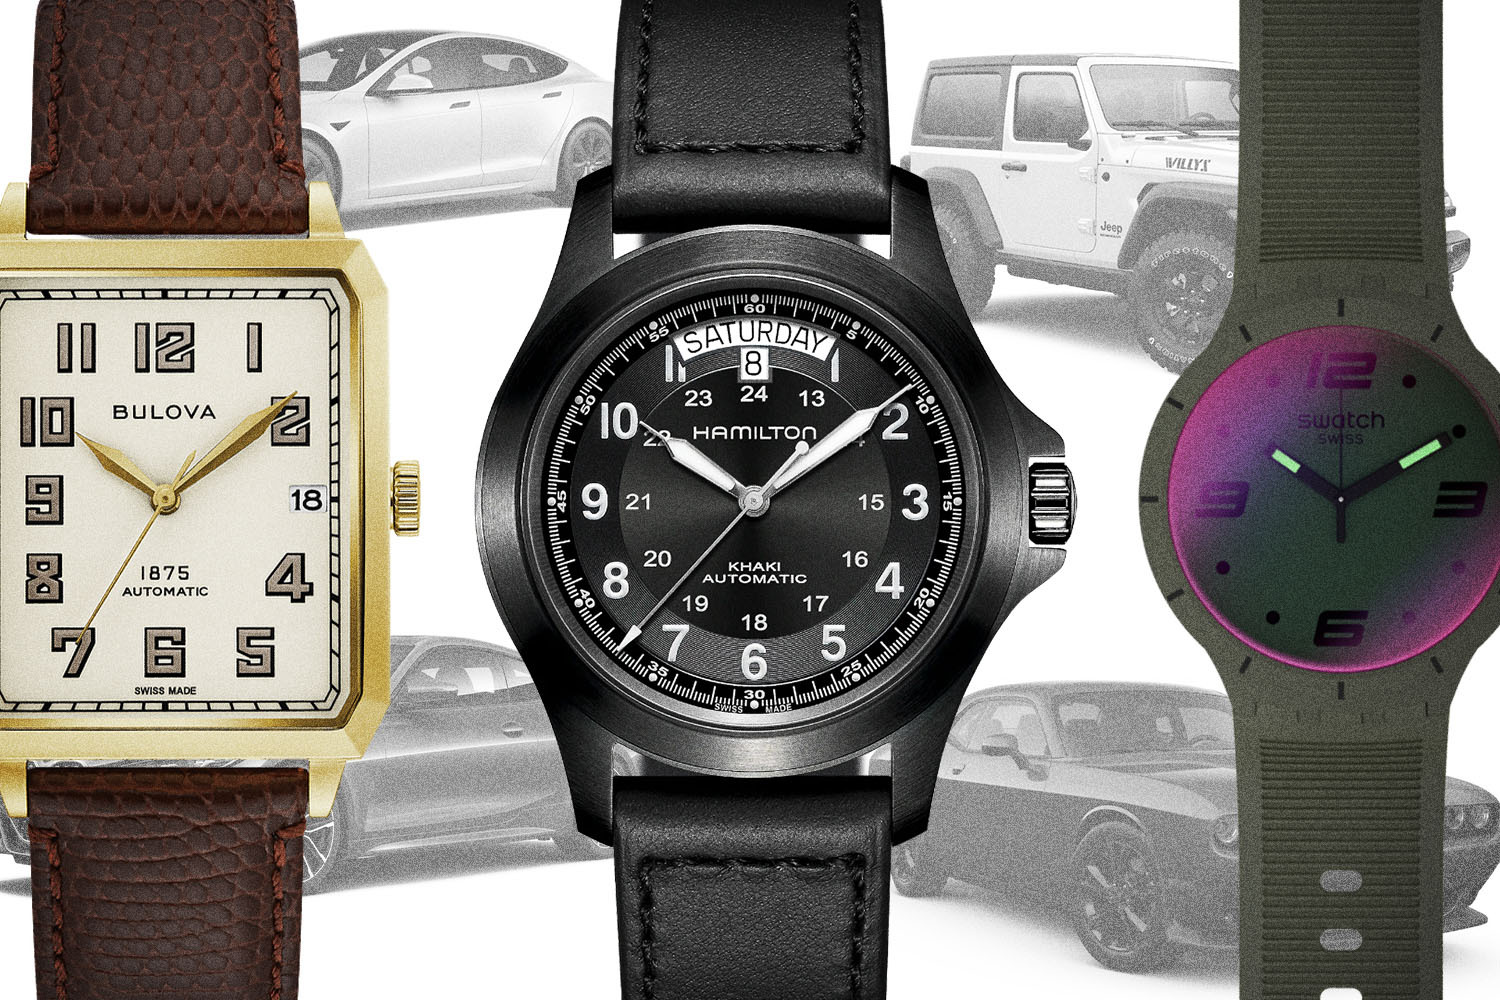 ZINVO Officially Partners With DODGE To Provide Horsepower at the Wrist